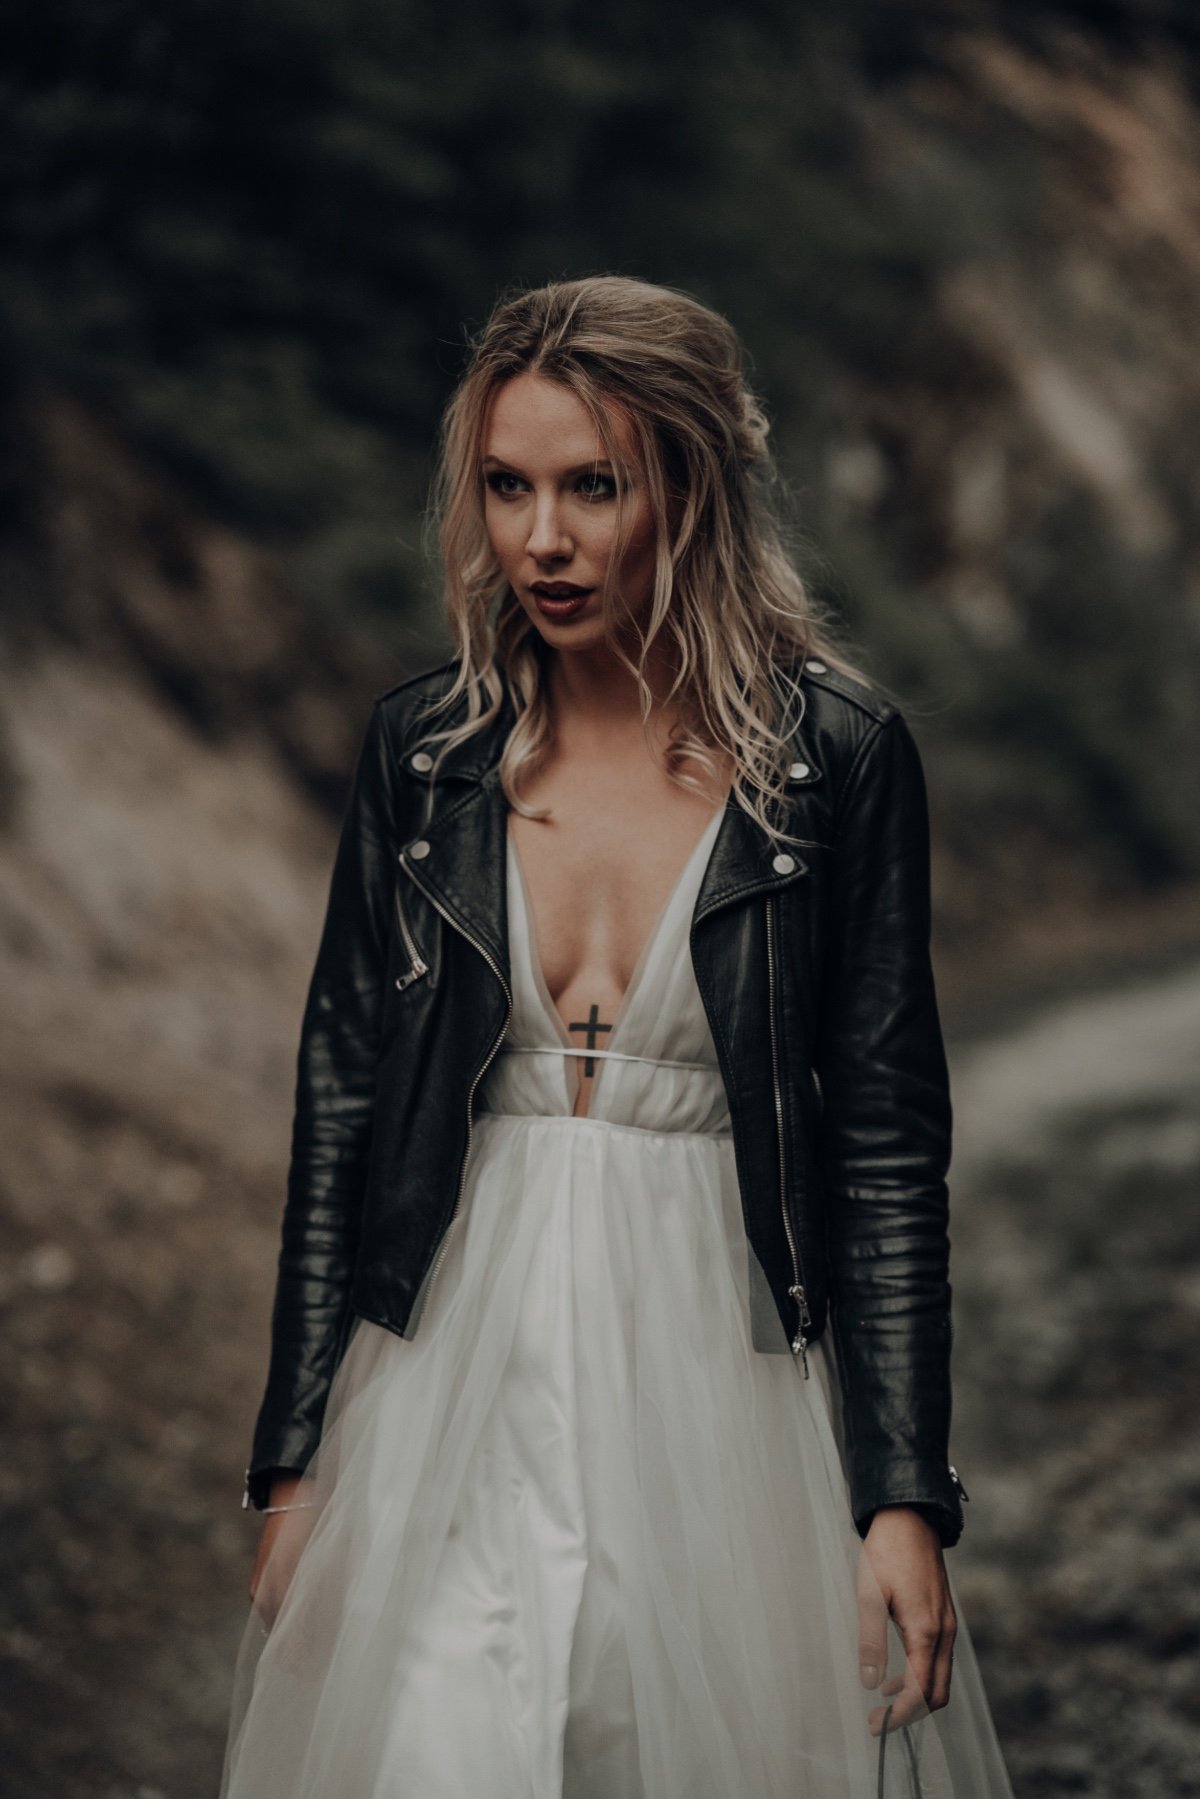 bridal dress paired with leather jacket